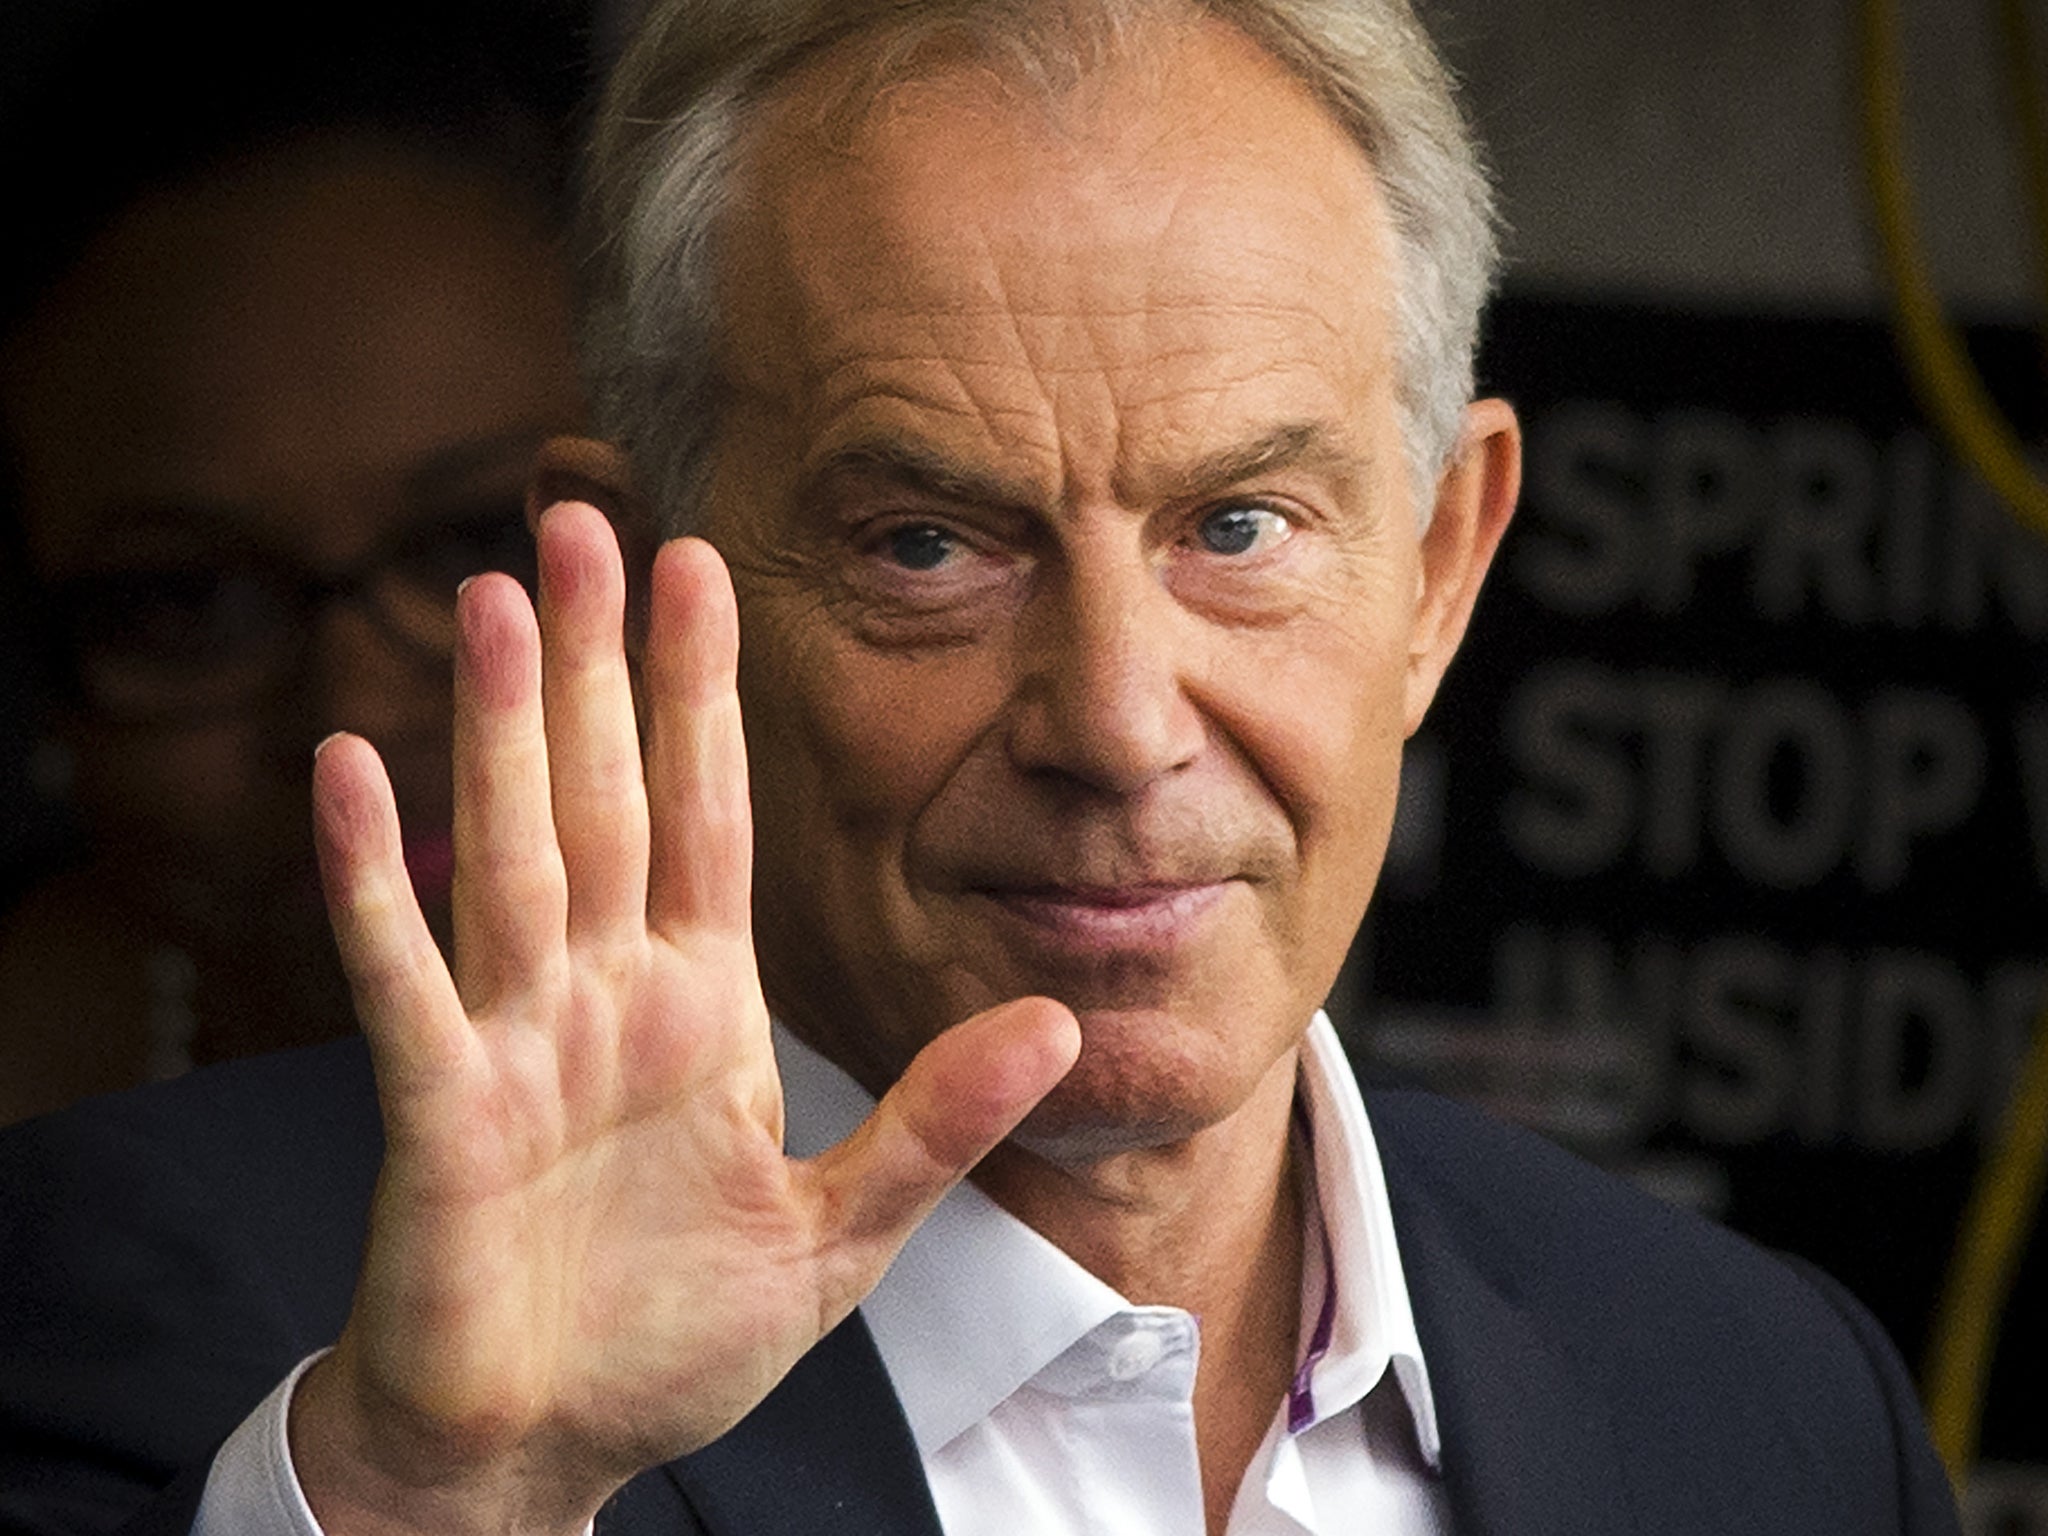 In an interview with CNN to be broadcast on Sunday, Tony Blair is asked the question: ‘Was the Iraq War a mistake?’